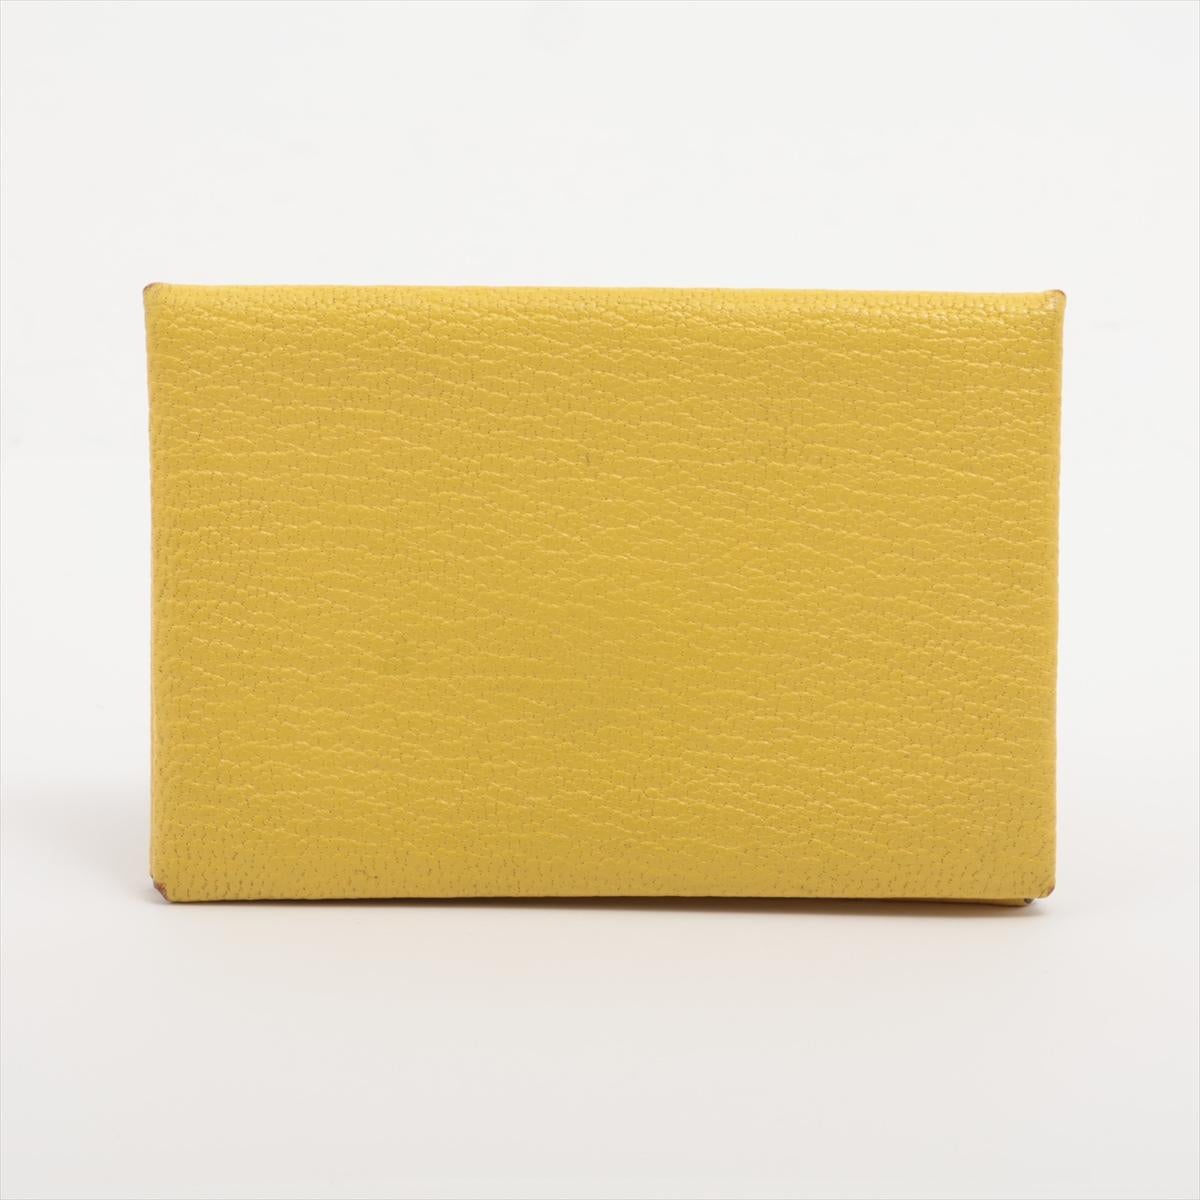 Hermès Calvi Card Holder Limoncello In Good Condition For Sale In Indianapolis, IN